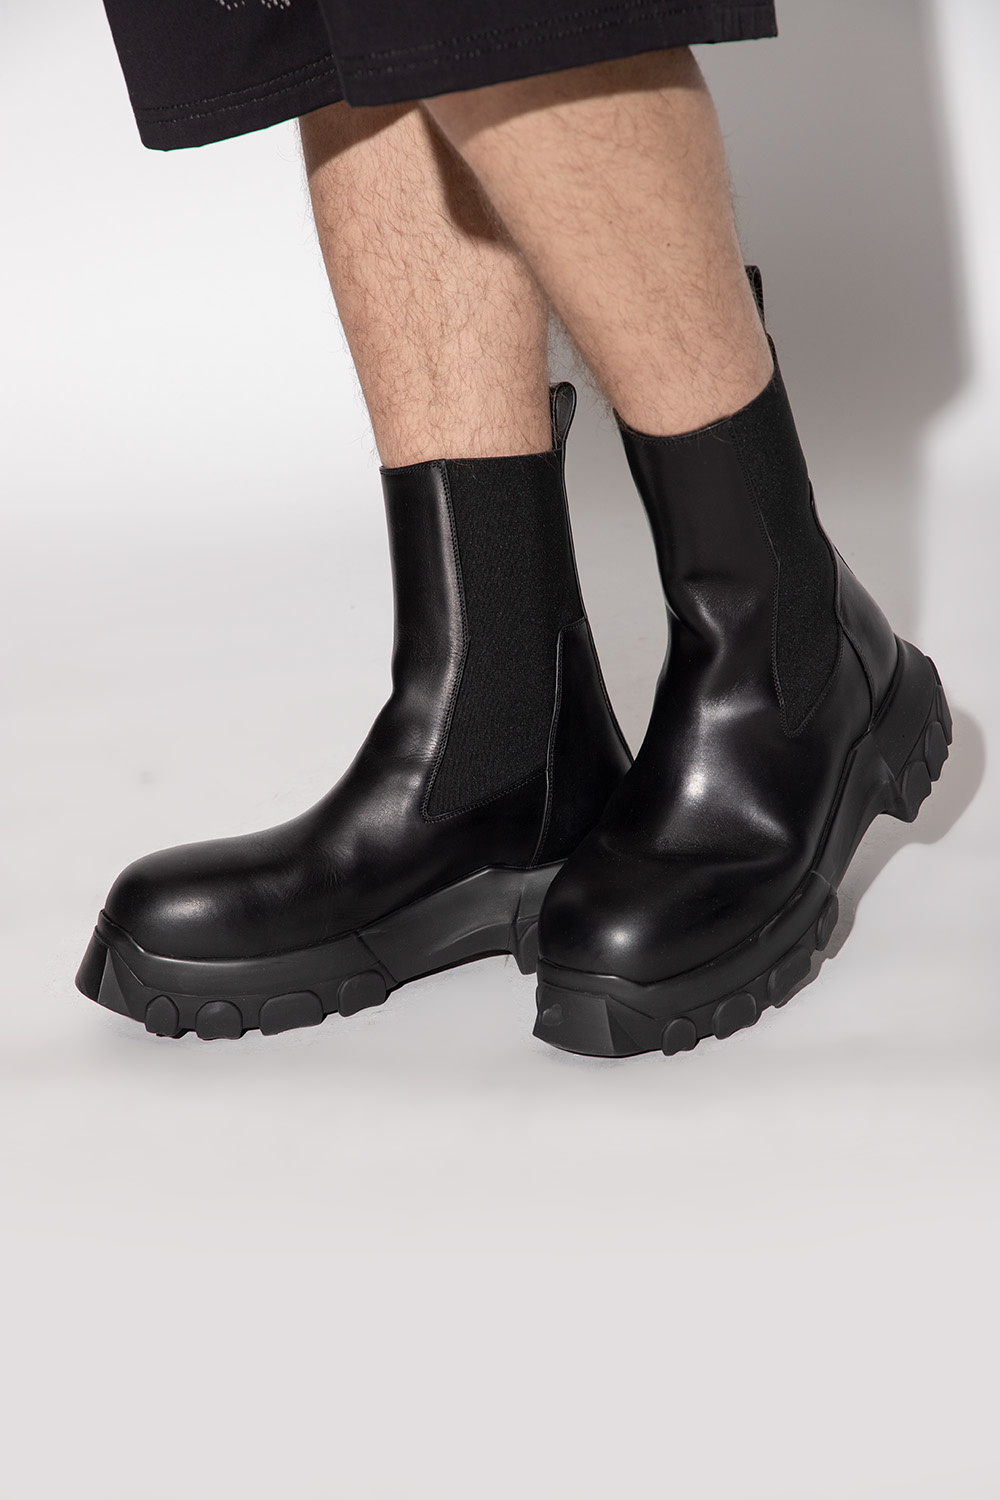 Rick Owens 'Beatle Bozo Tractor' leather ankle boots | Men's Shoes ...